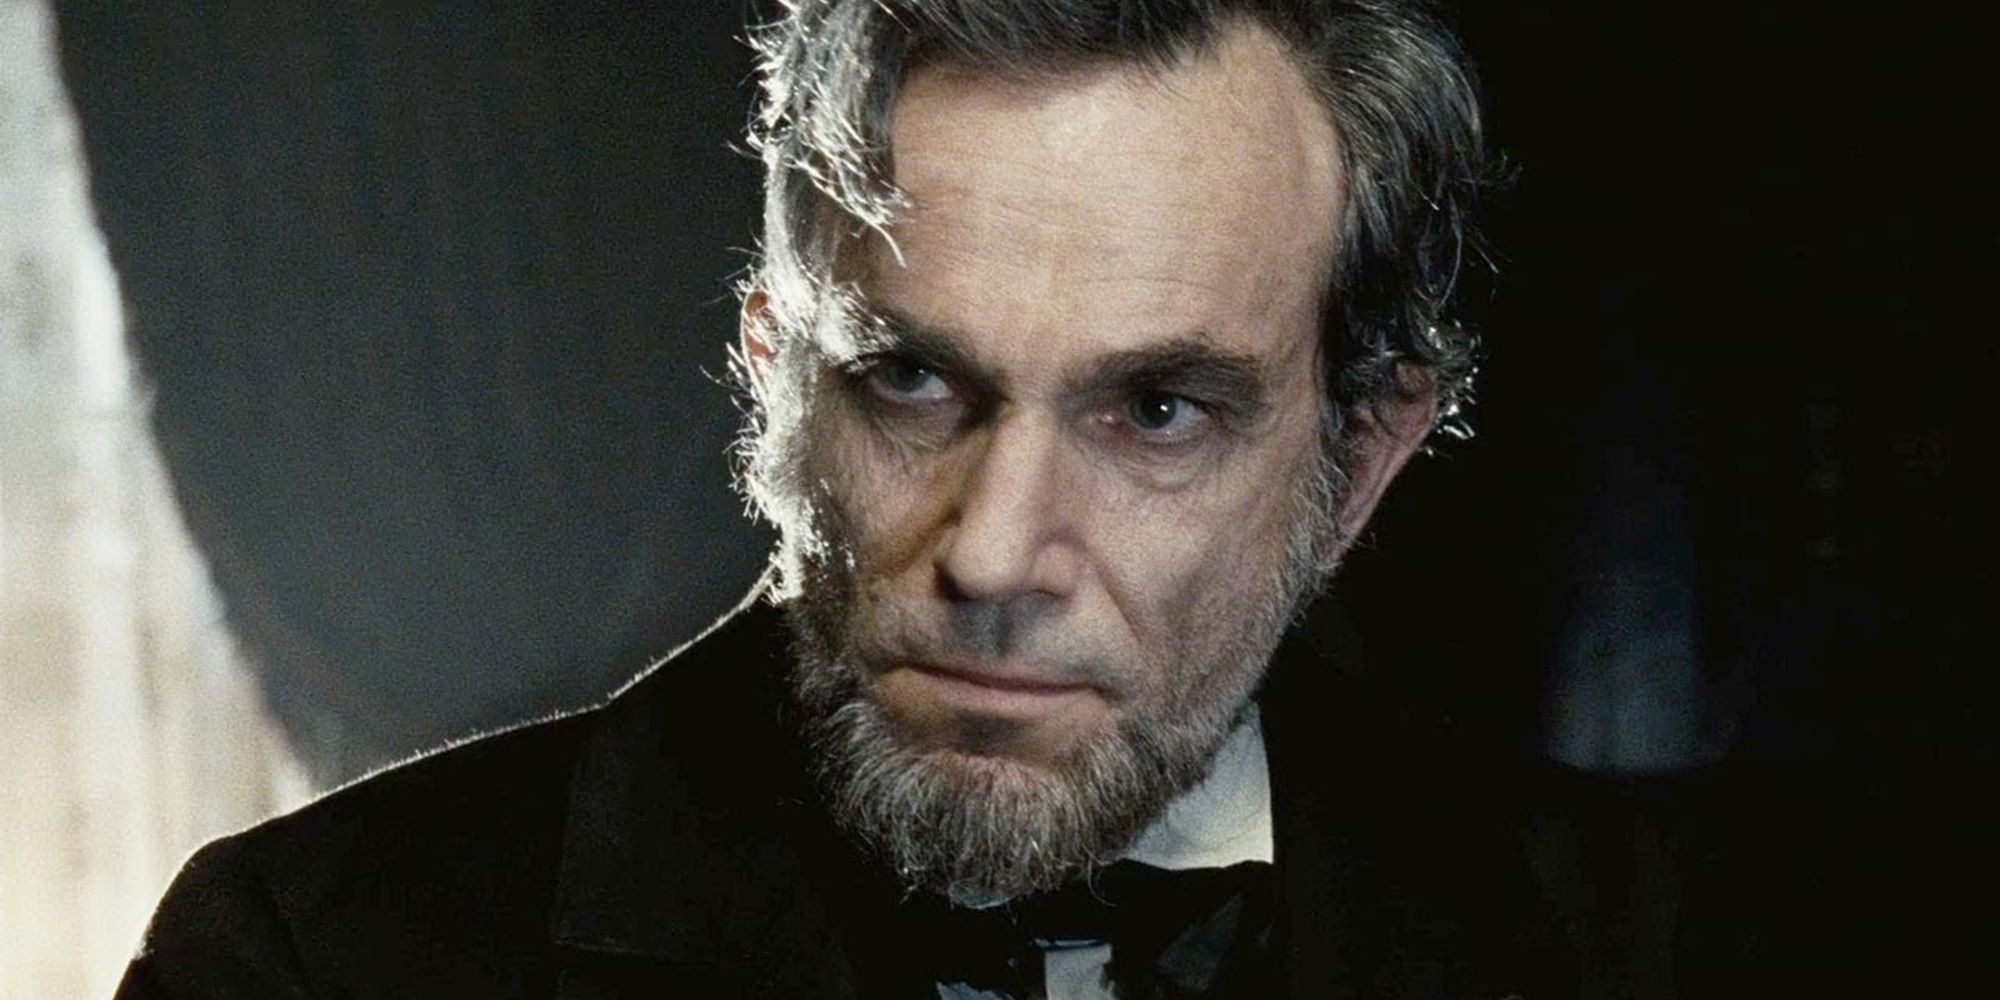 Daniel Day-Lewis as Abraham Lincoln looking angry in Lincoln.